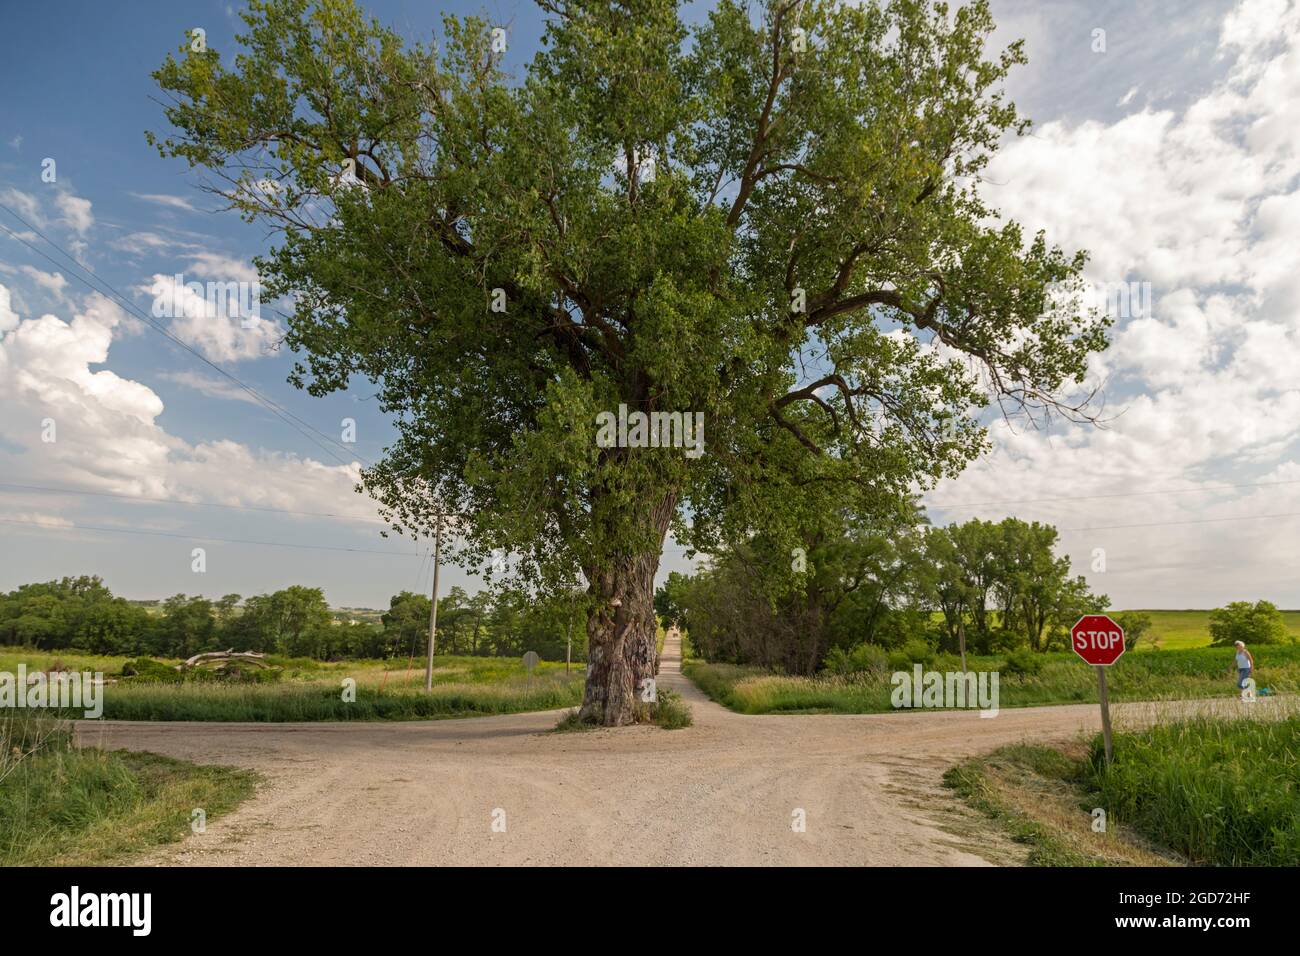 Brayton, Iowa - Tree in the Road. A large cottonwood growing in the middle of an intersection of two rural dirt roads. Stock Photo